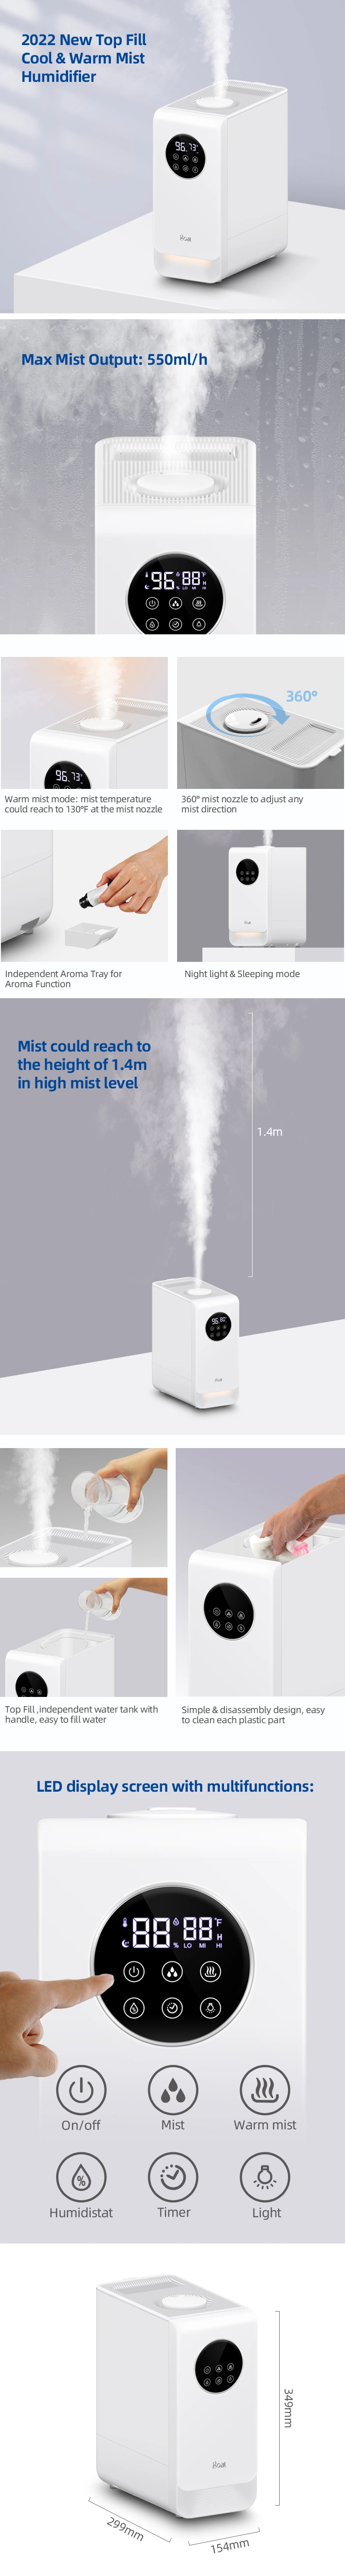 Go-2265ah Hybrid Humidifier Cool and Warm Mist Humidifier Large Capacity 6.5L Night Light LED Aromatherapy Smart WiFi Humidifier